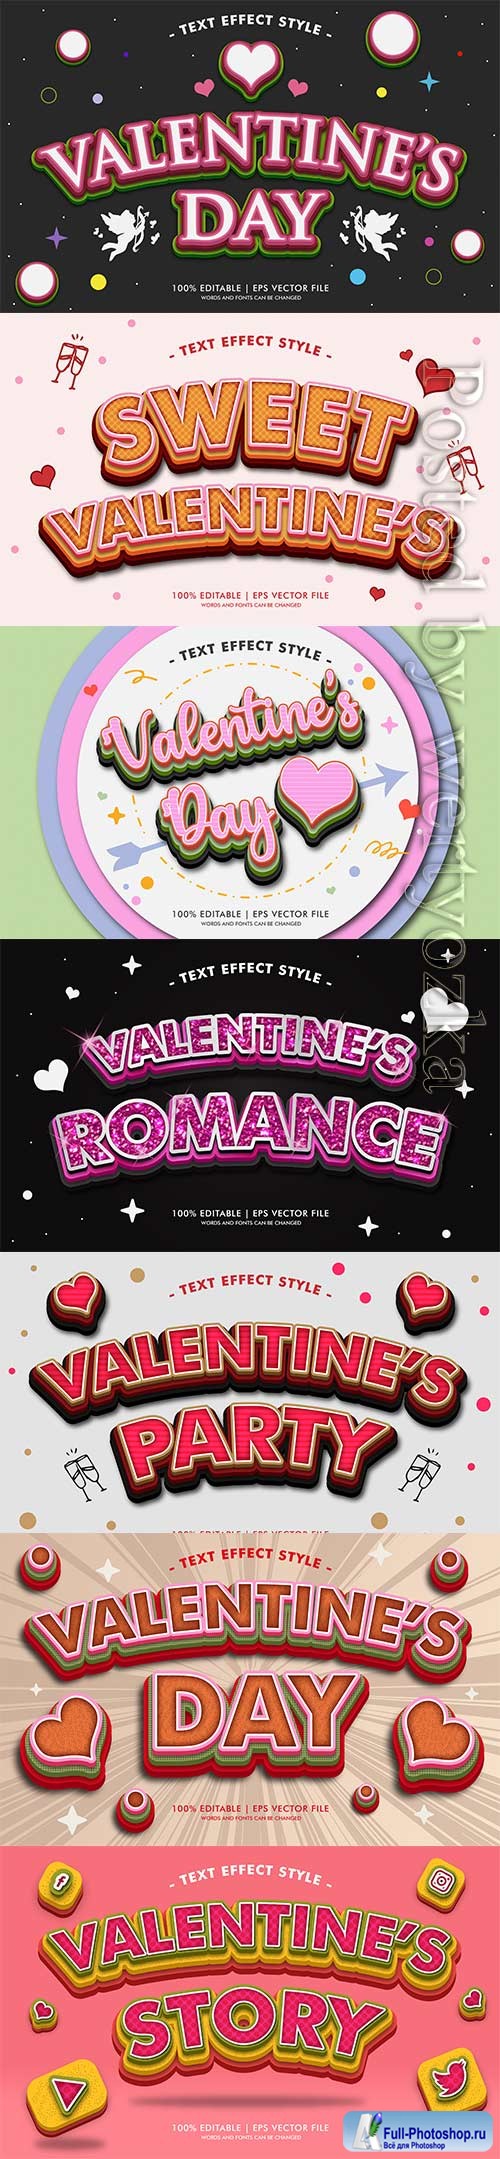 Valentine romance text effects style in vector